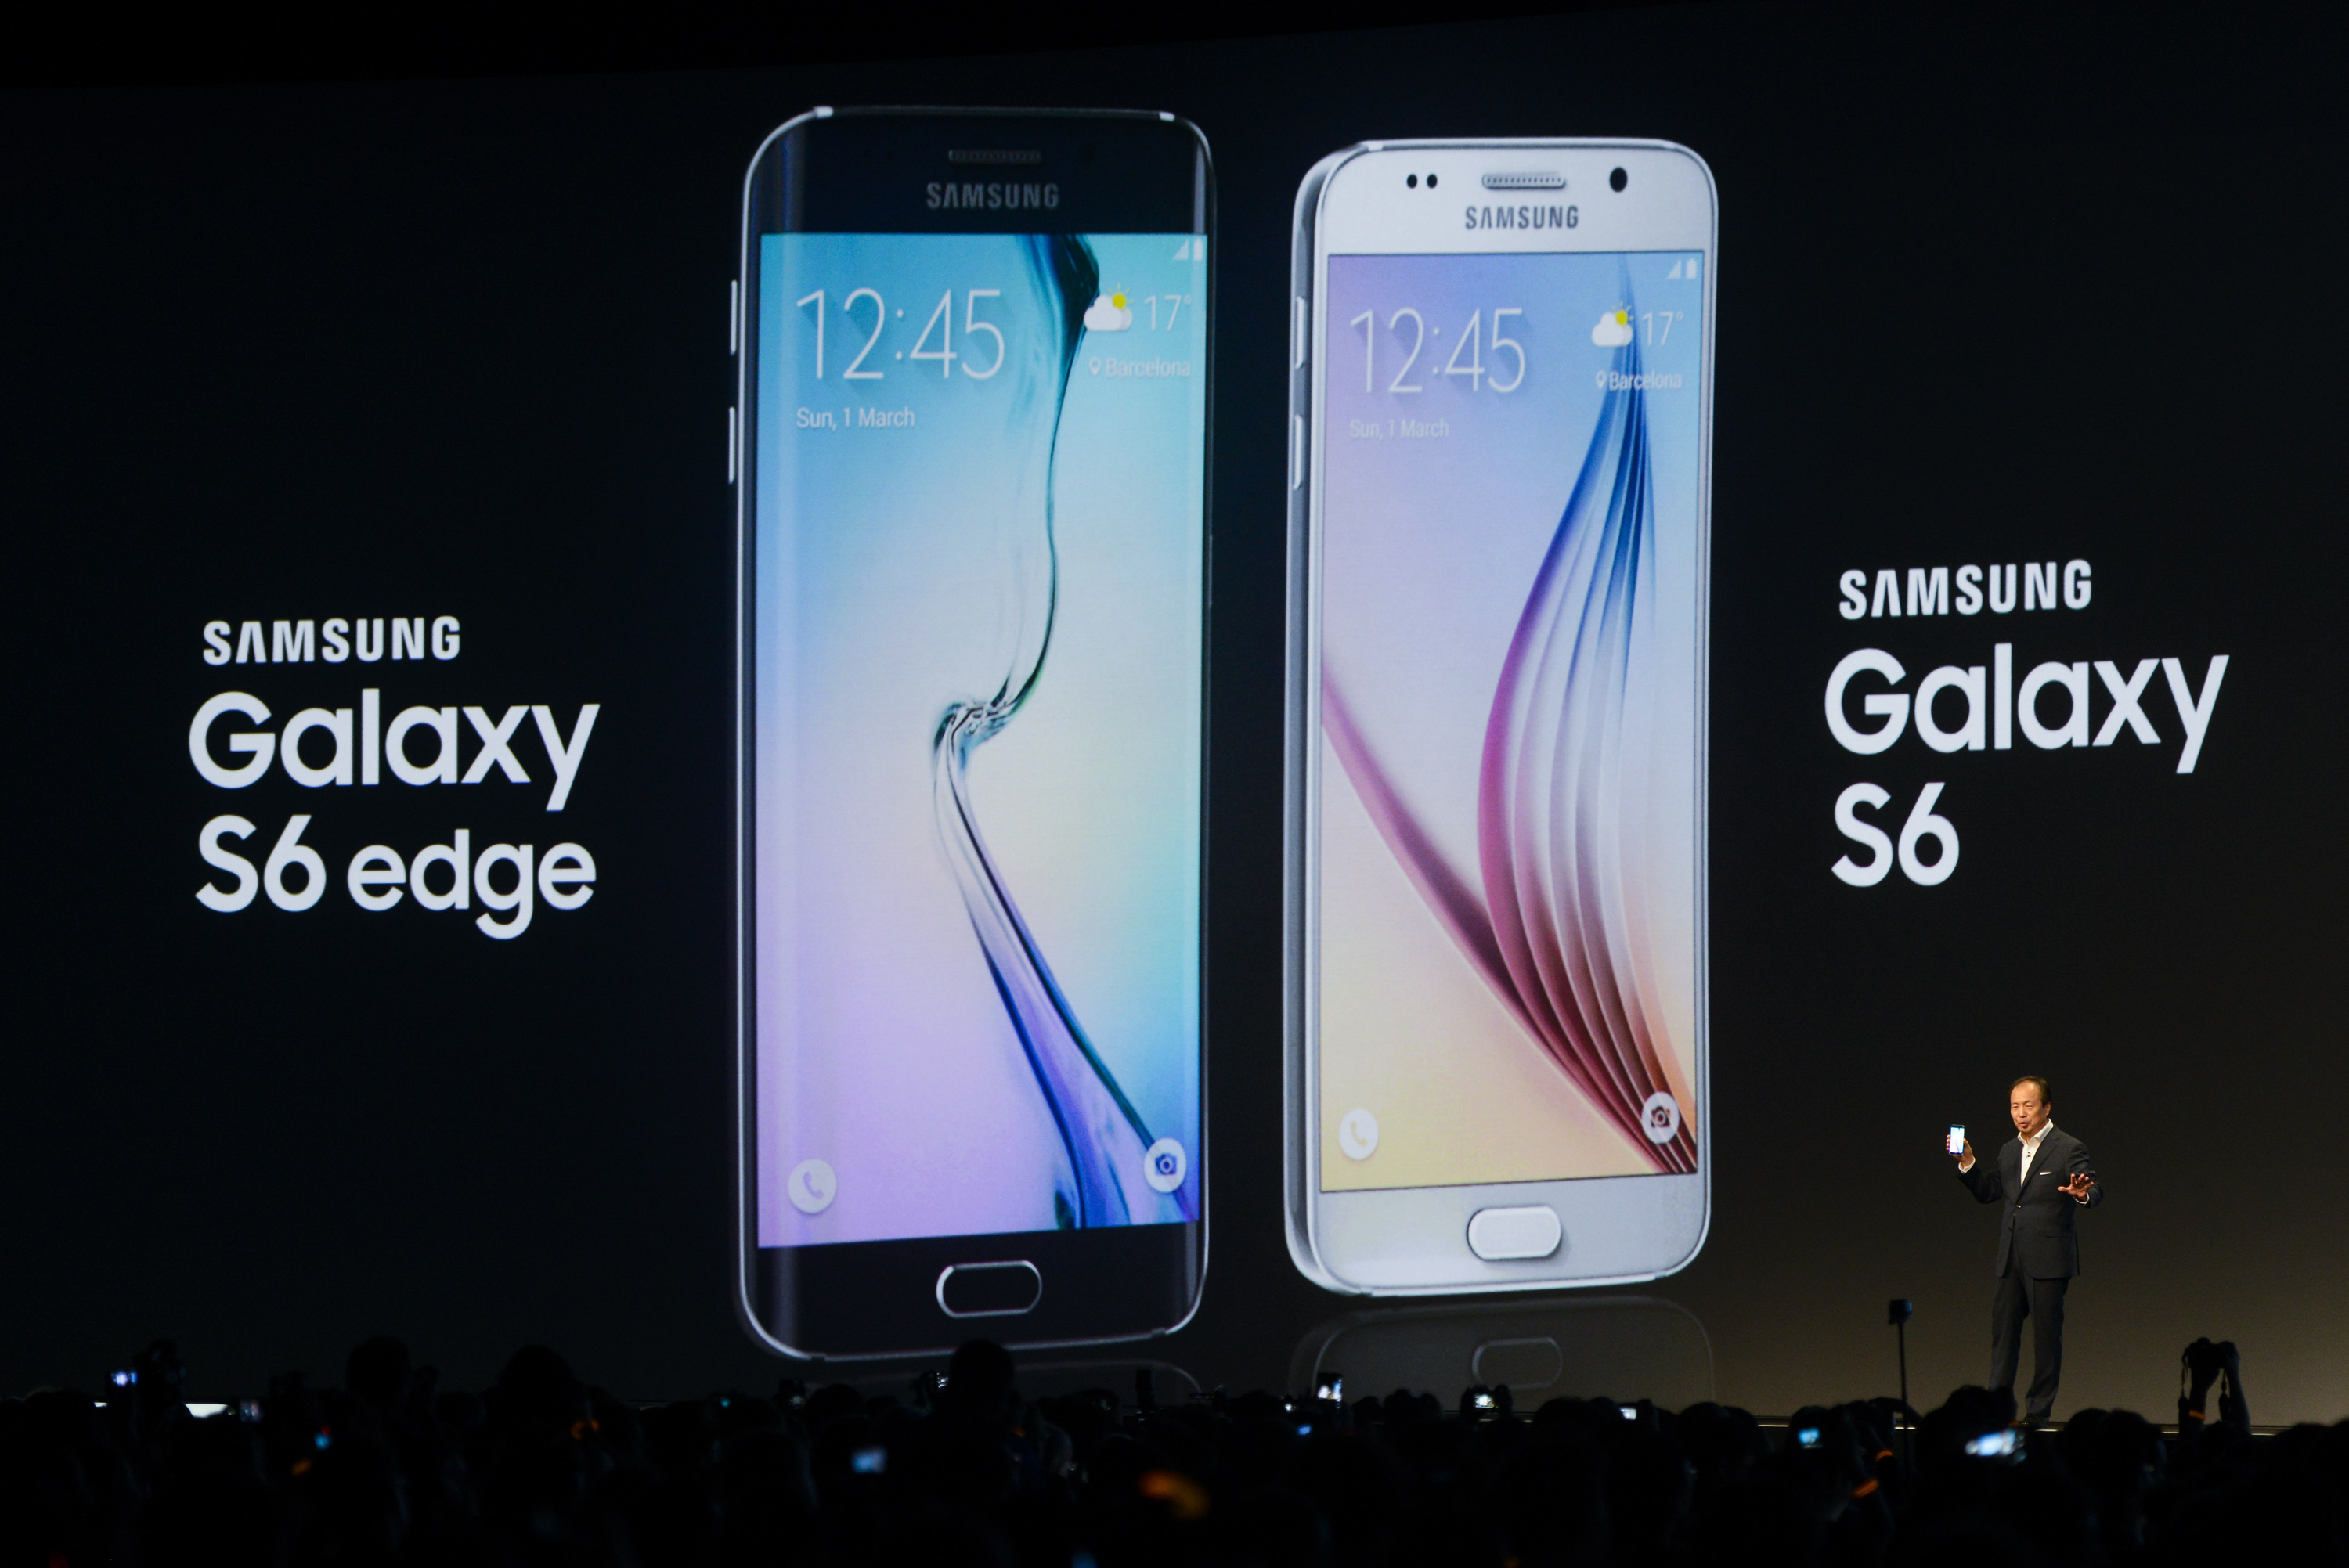 CEO and President of Samsung JK Shin presents the new Samsung Galaxy S6 during the  Mobile World Congress on March 1, 2015 in Barcelona, Spain. (David Ramos&mdash;Getty Images)